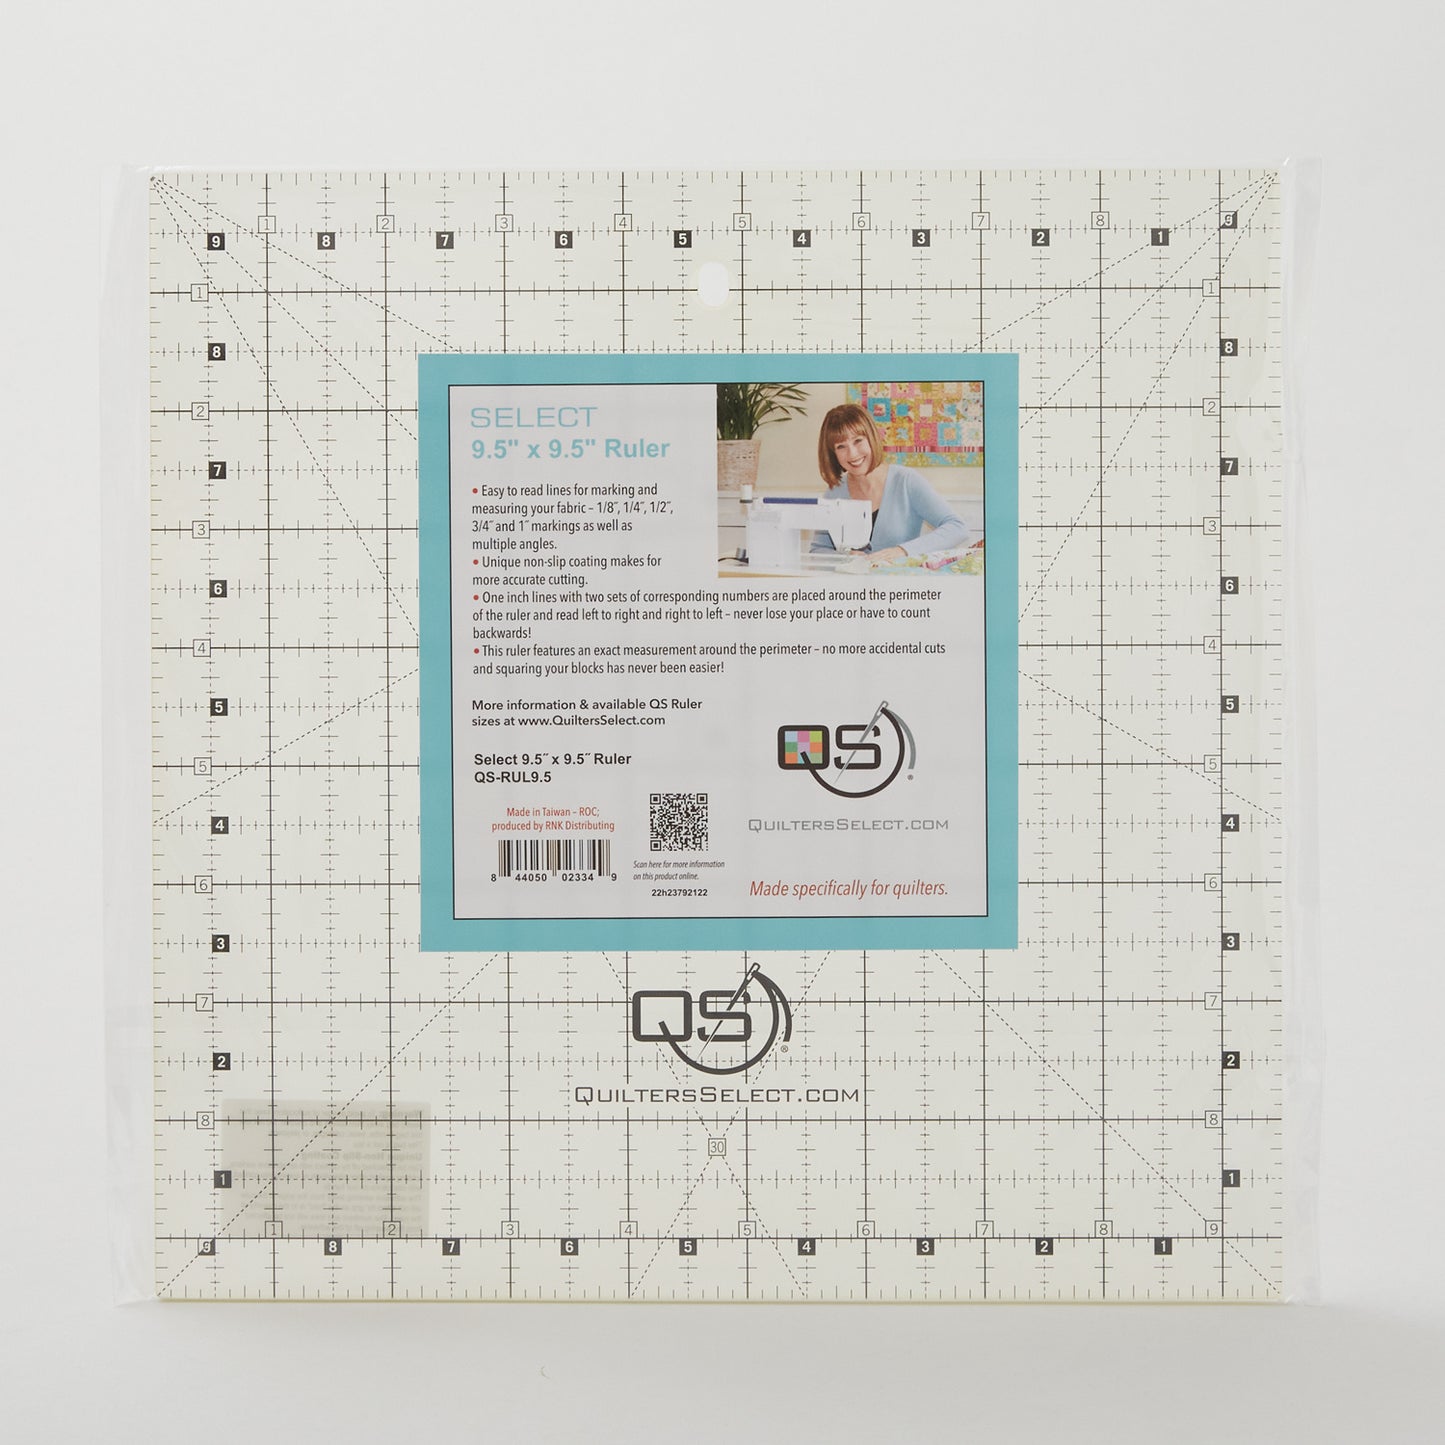 Quilters Select Non-Slip Ruler - 9.5" x 9.5" Alternative View #1